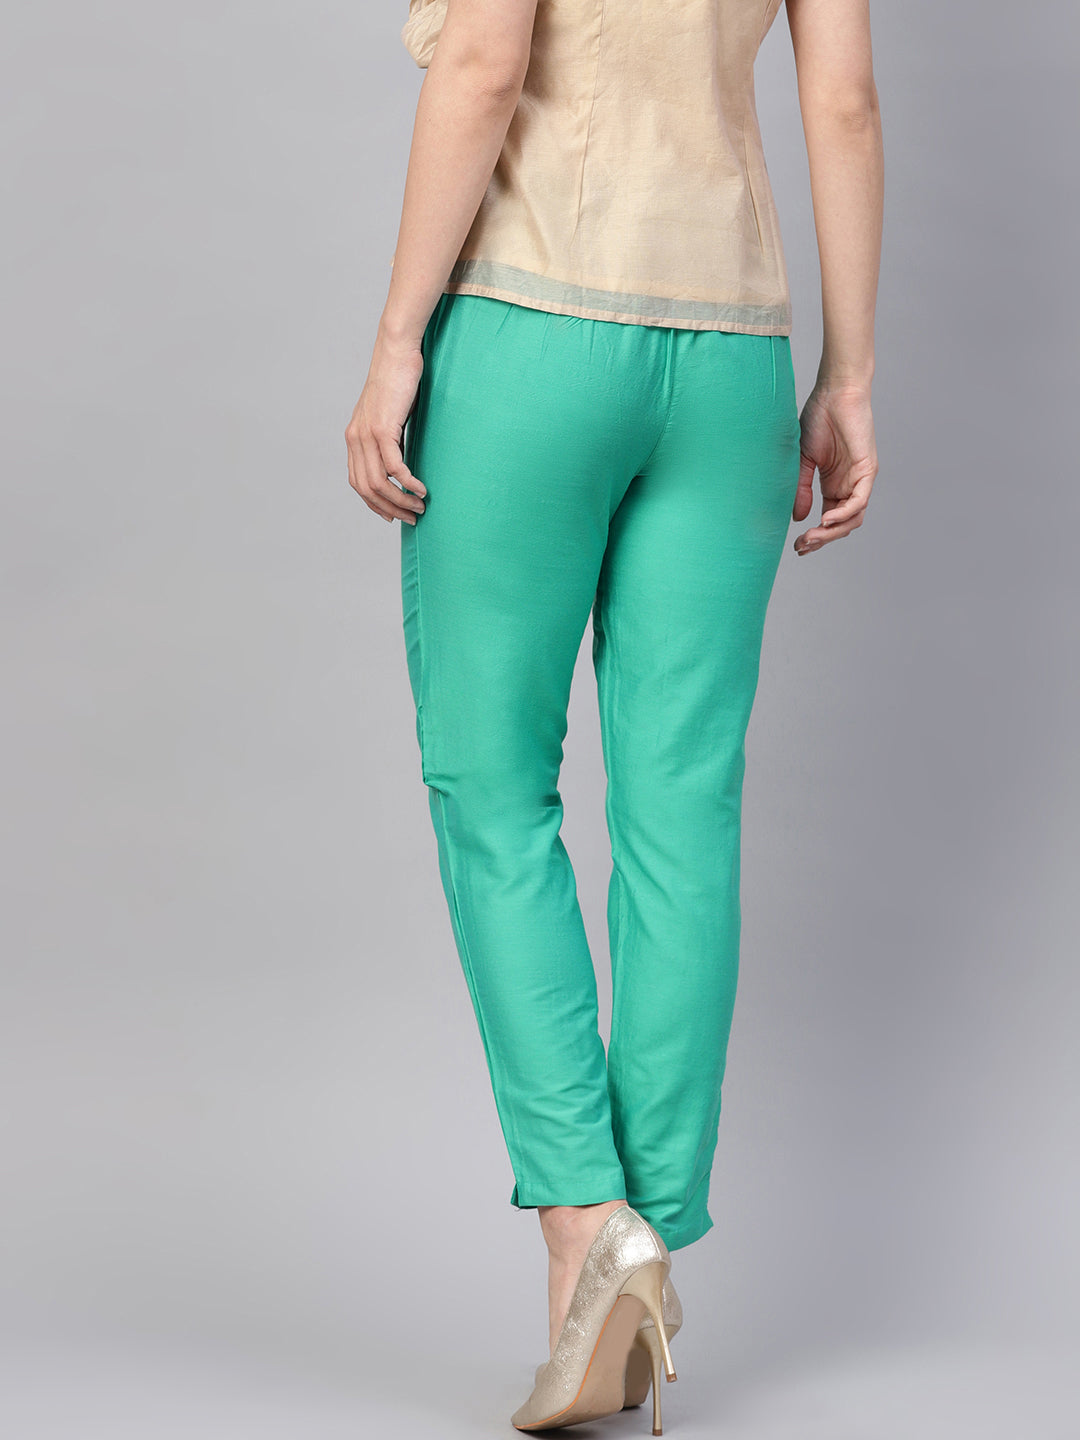 Sea Green Chanderi Solid Pant in Shiny Texture